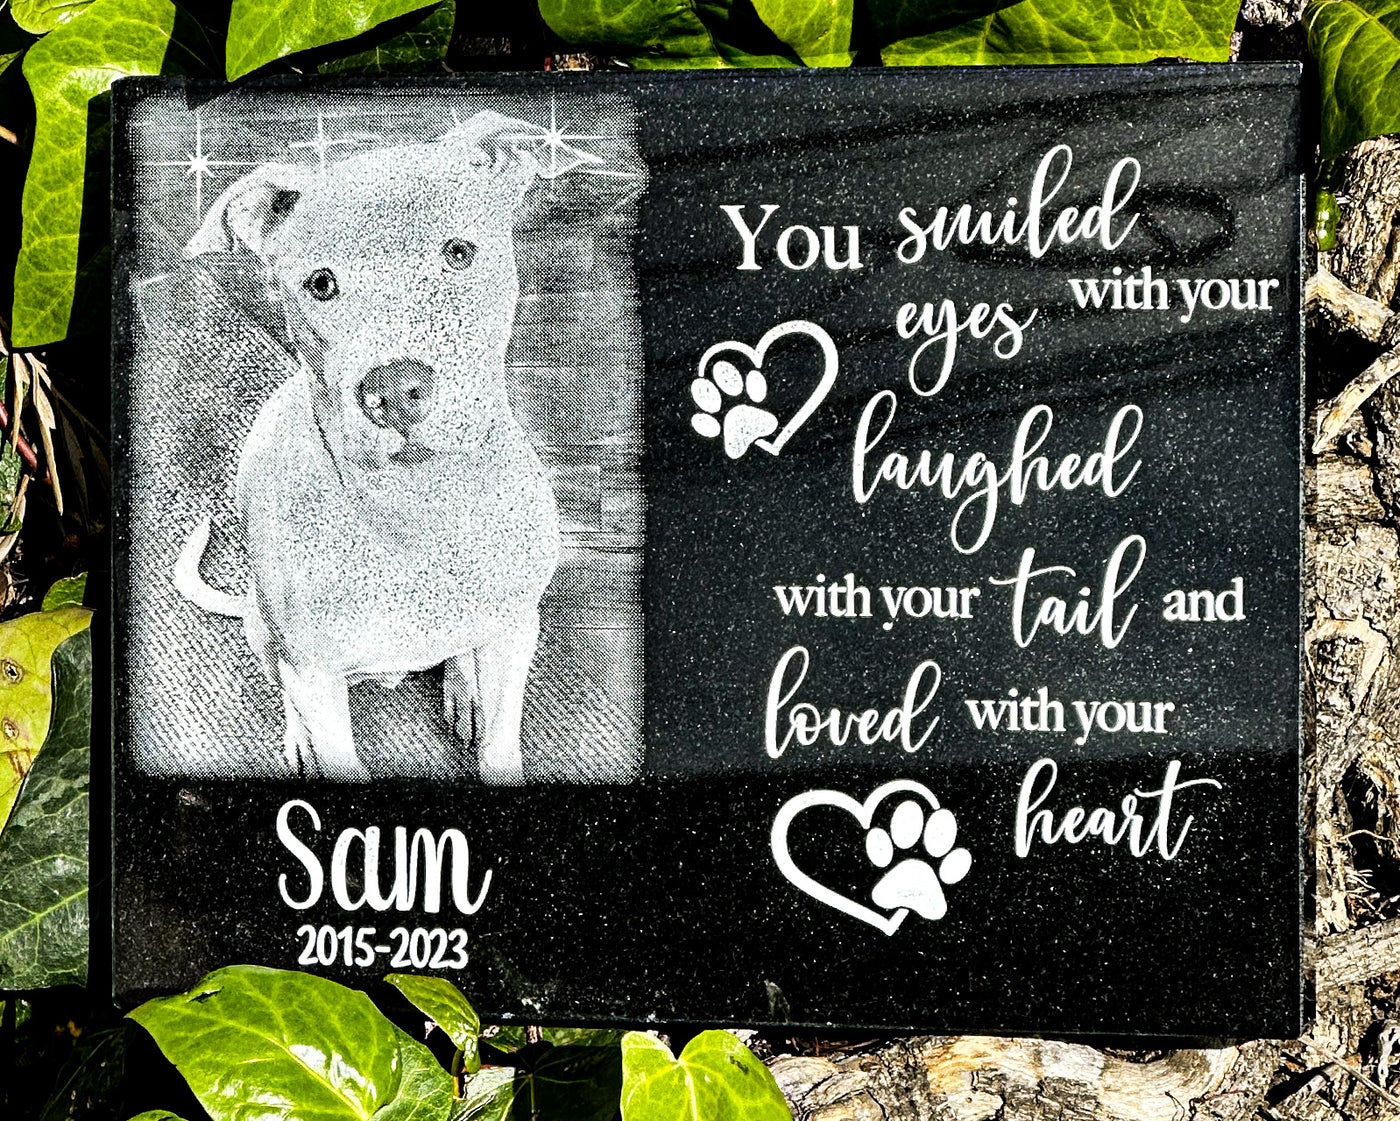 Outdoor Personalized Dog Memorial Plaque You Smiled with your eyes, laughed with your tail and loved with your heart Personalized Outdoor Plaque